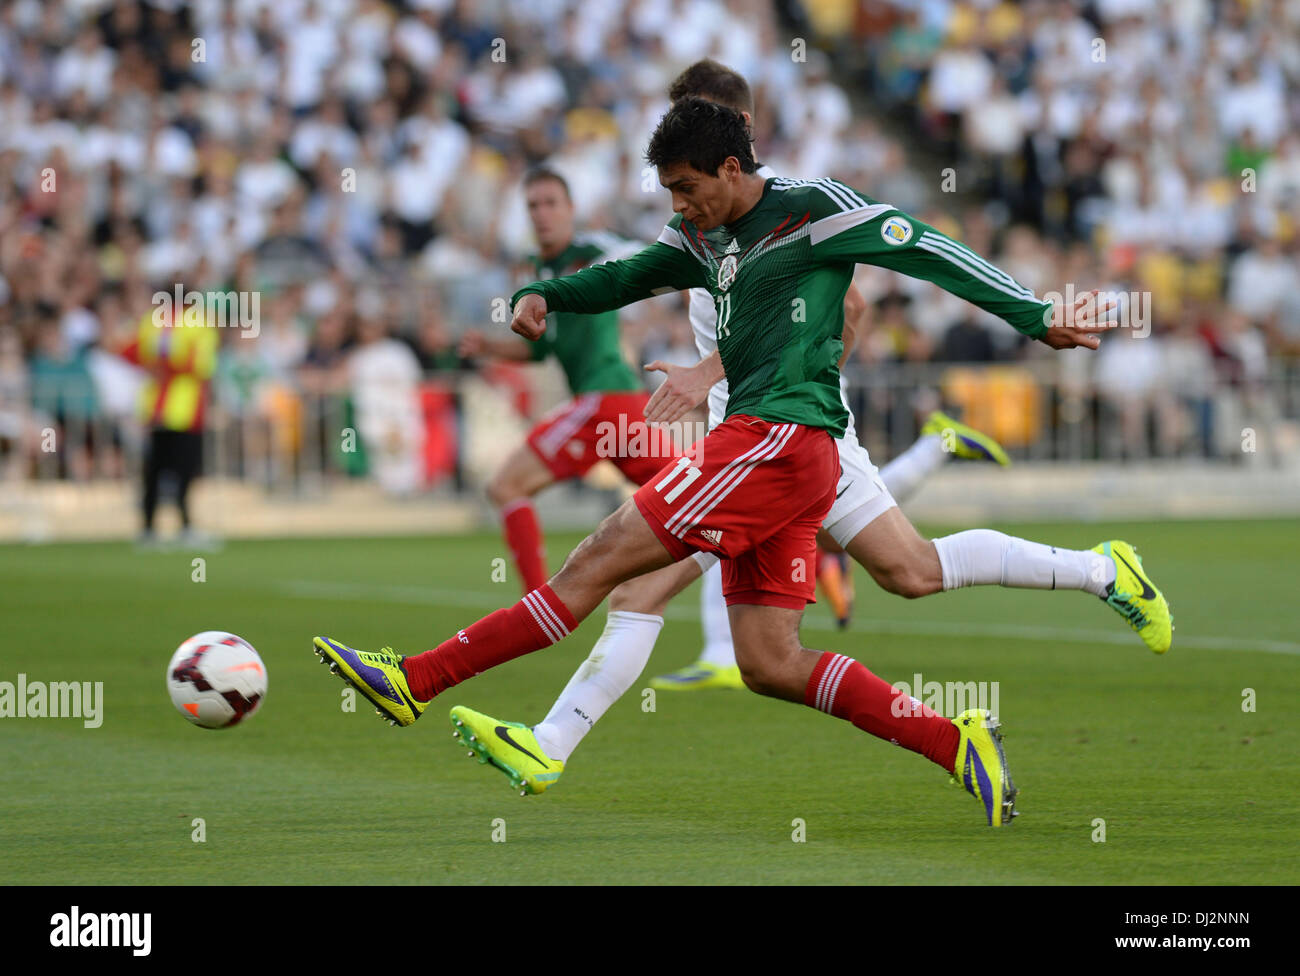 Wellington, New Zealand. 20th Nov, 2013. Raul Jimenez in action during the FIFA Football World Cup Qualifier 2nd Leg match. New Zealand All Whites v Mexico. Credit:  Action Plus Sports/Alamy Live News Stock Photo